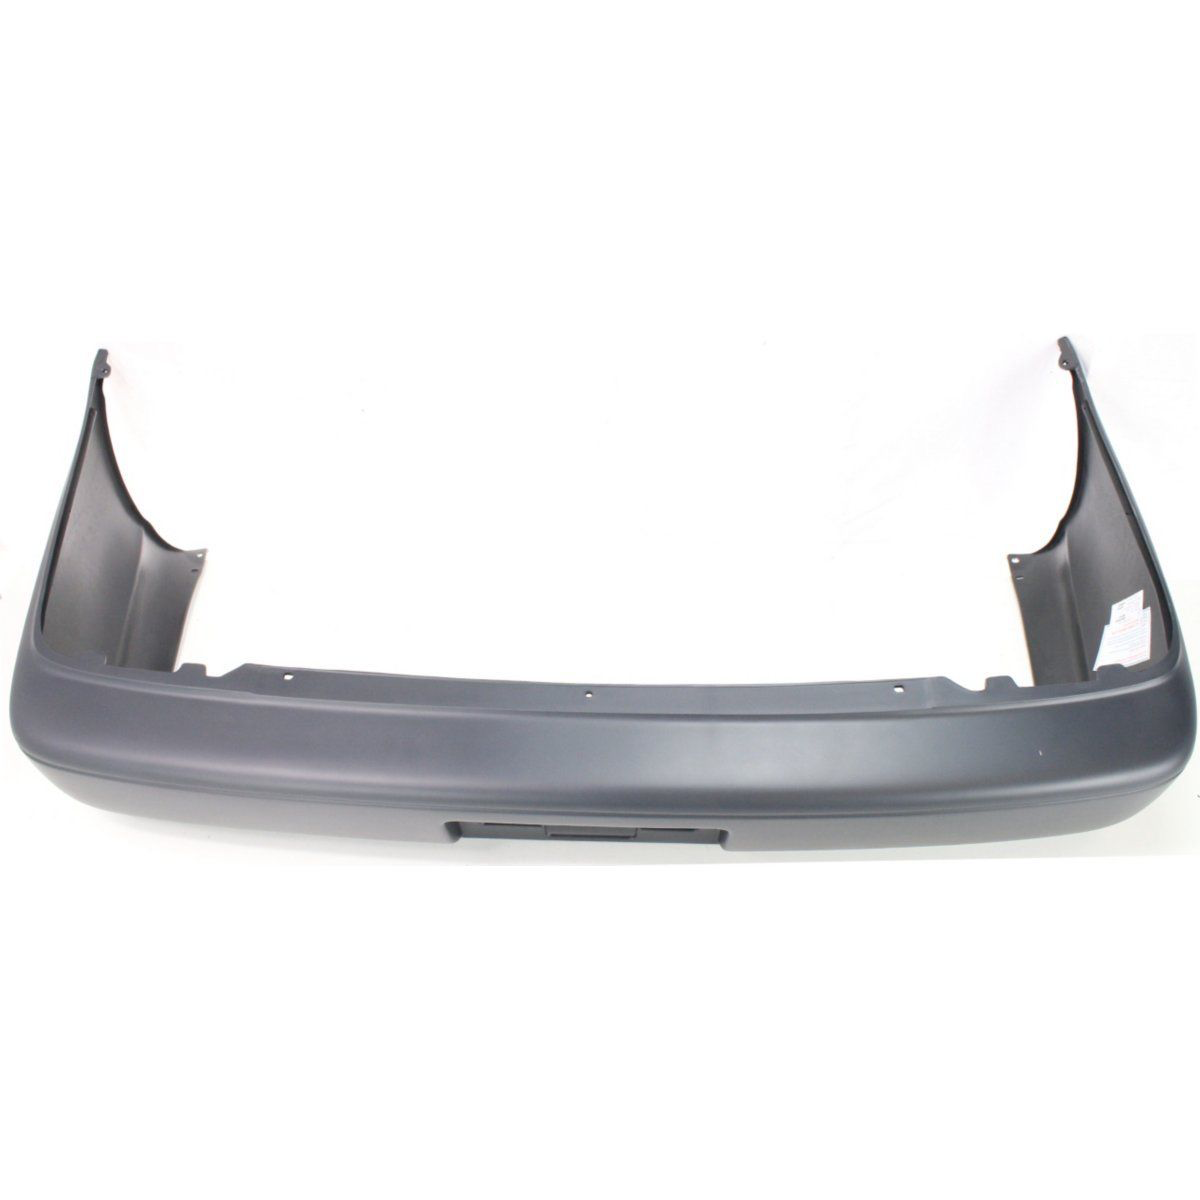 1993-1997 TOYOTA COROLLA Rear Bumper Cover 4dr sedan Painted to Match